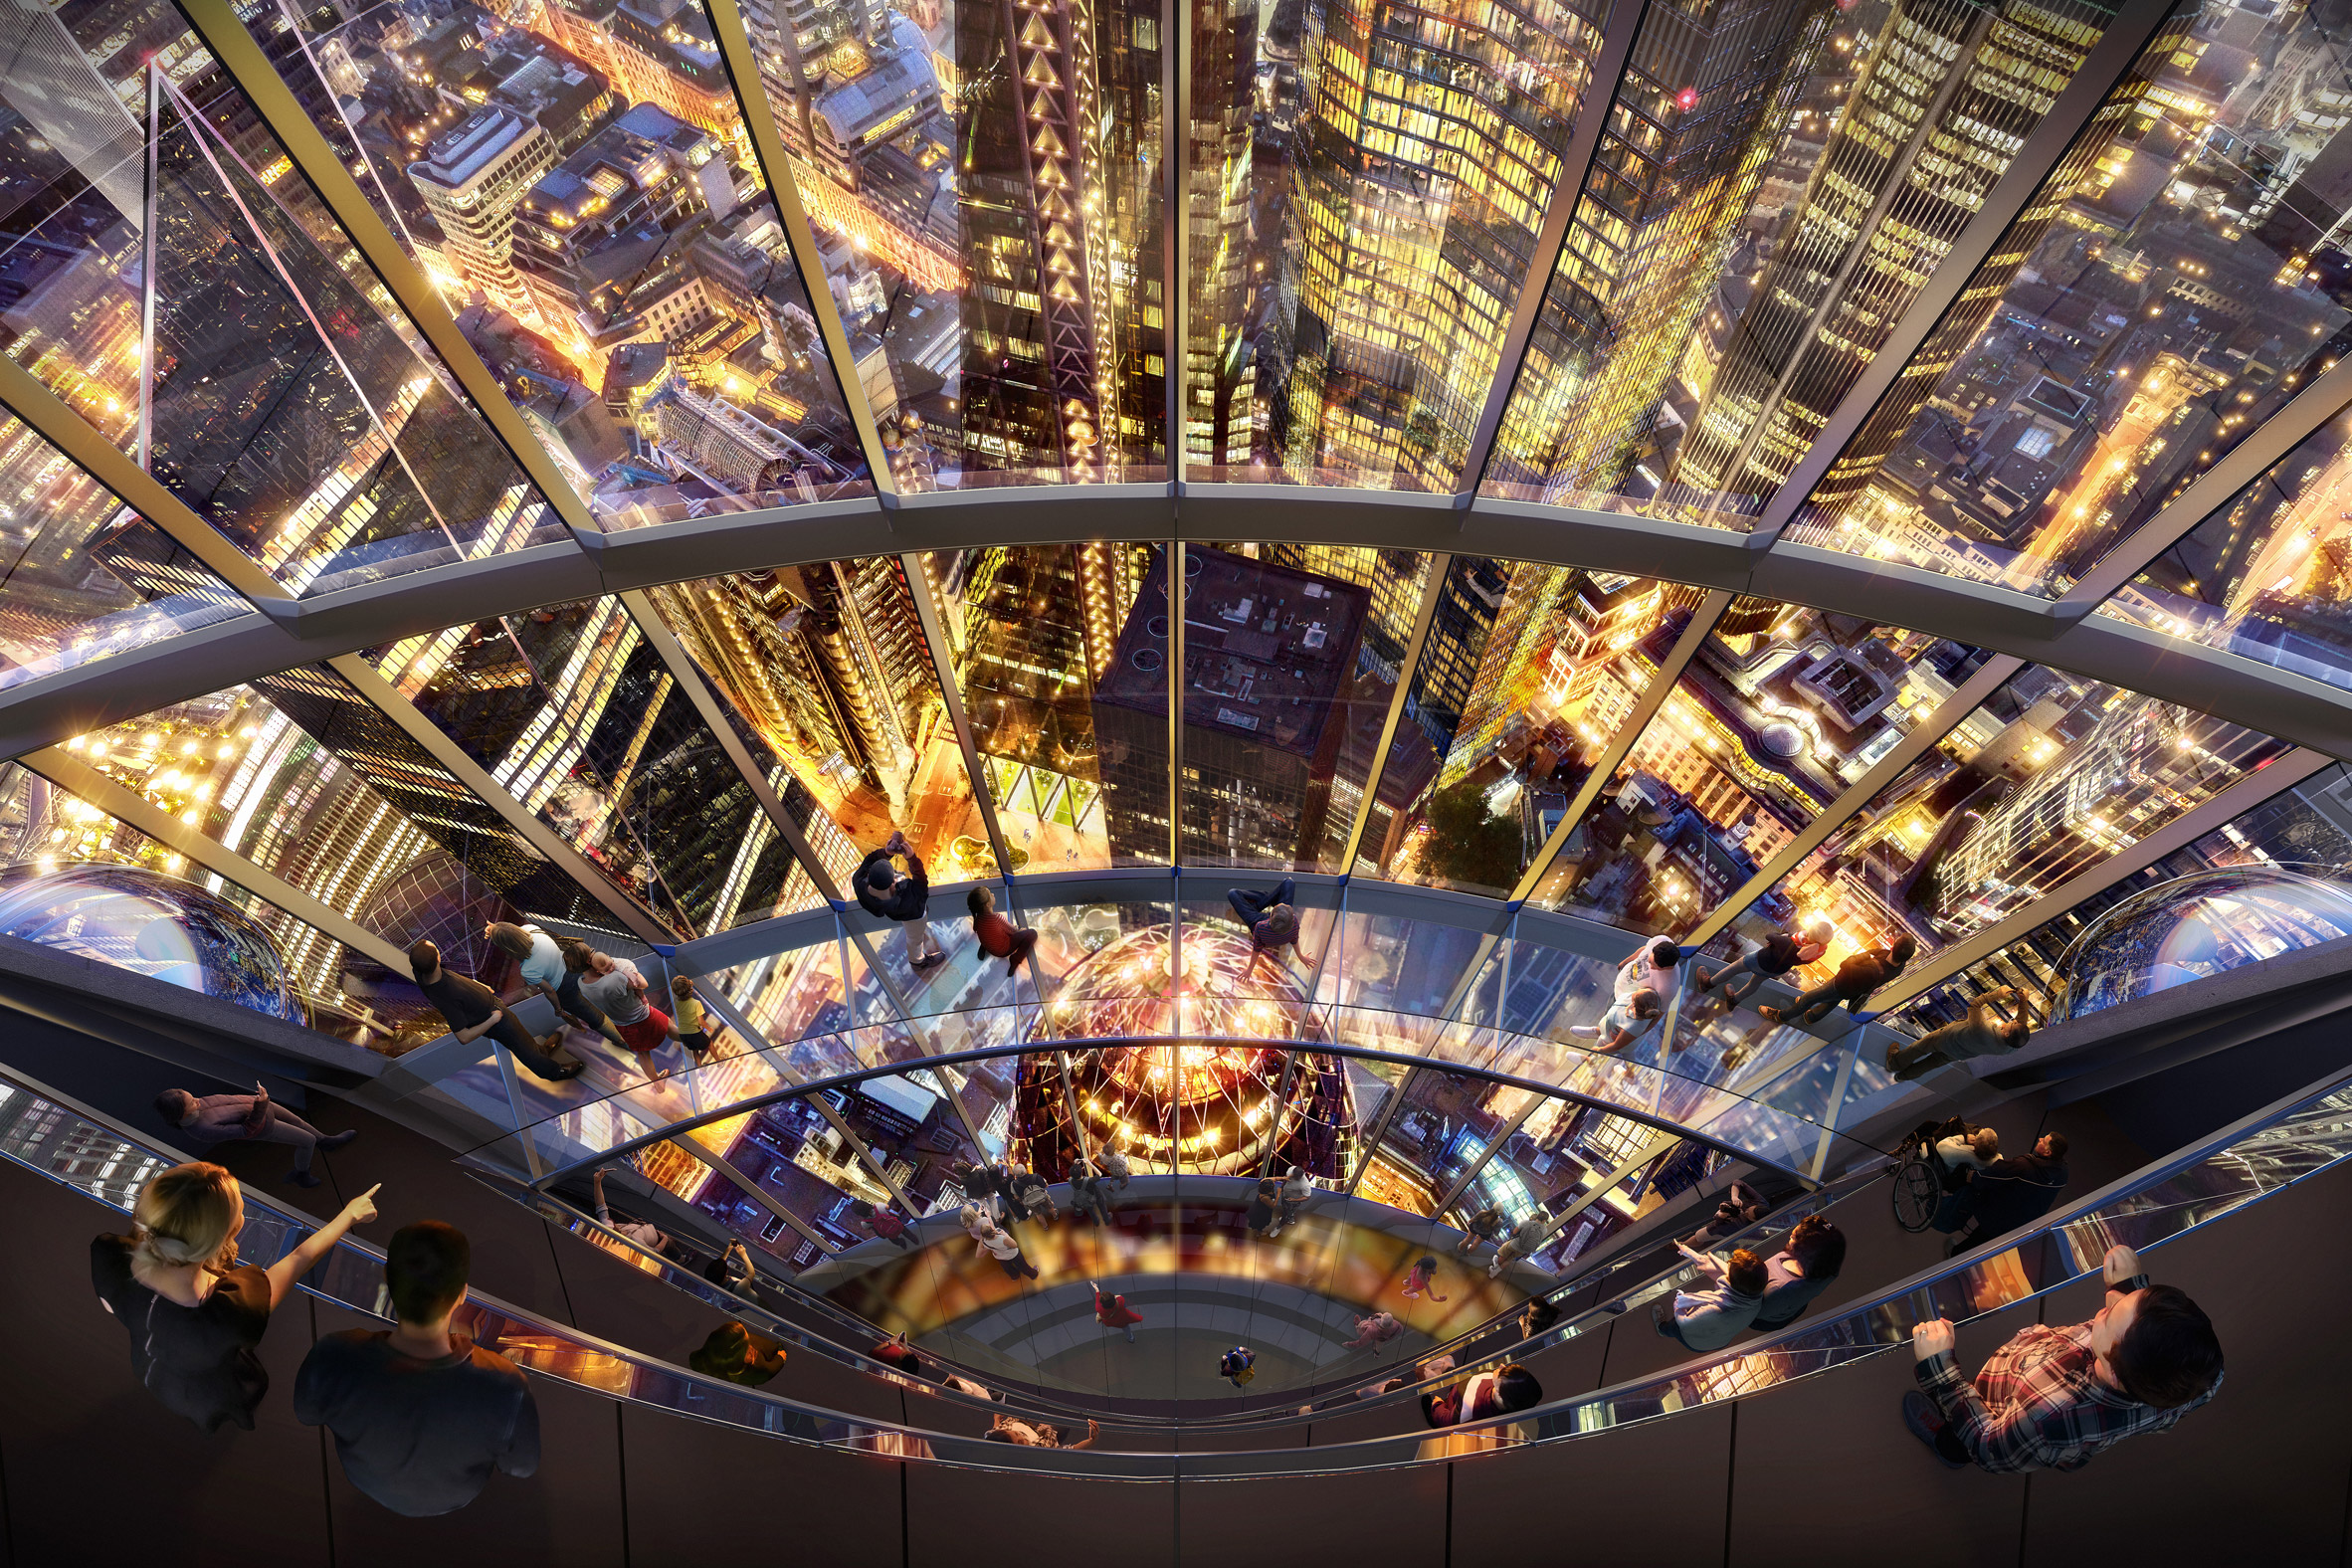 Sky bridges would run between the observation decks, and the tower would have a panoramic bar and restaurant.